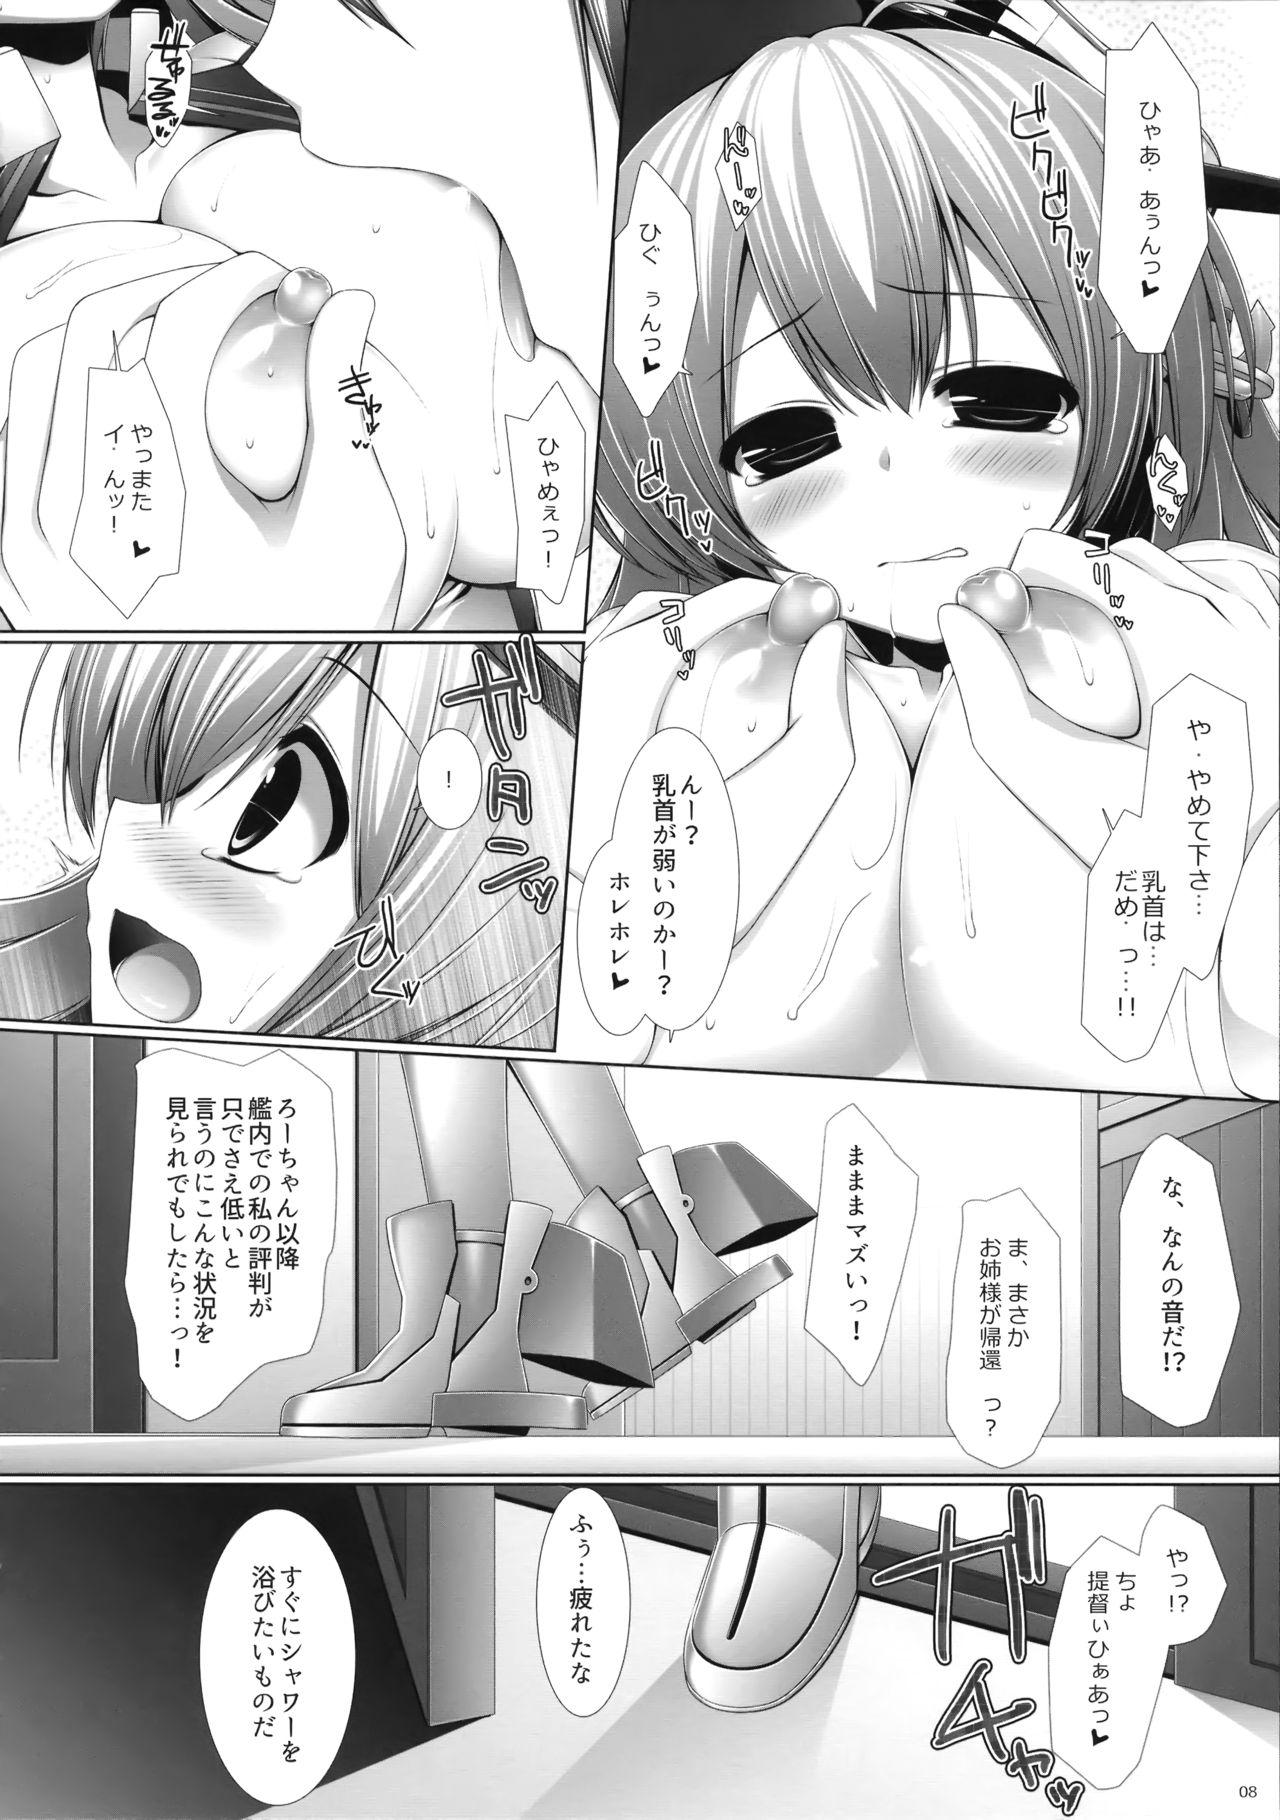 Classy Night battle ship girls - Kantai collection Lesbians - Page 7